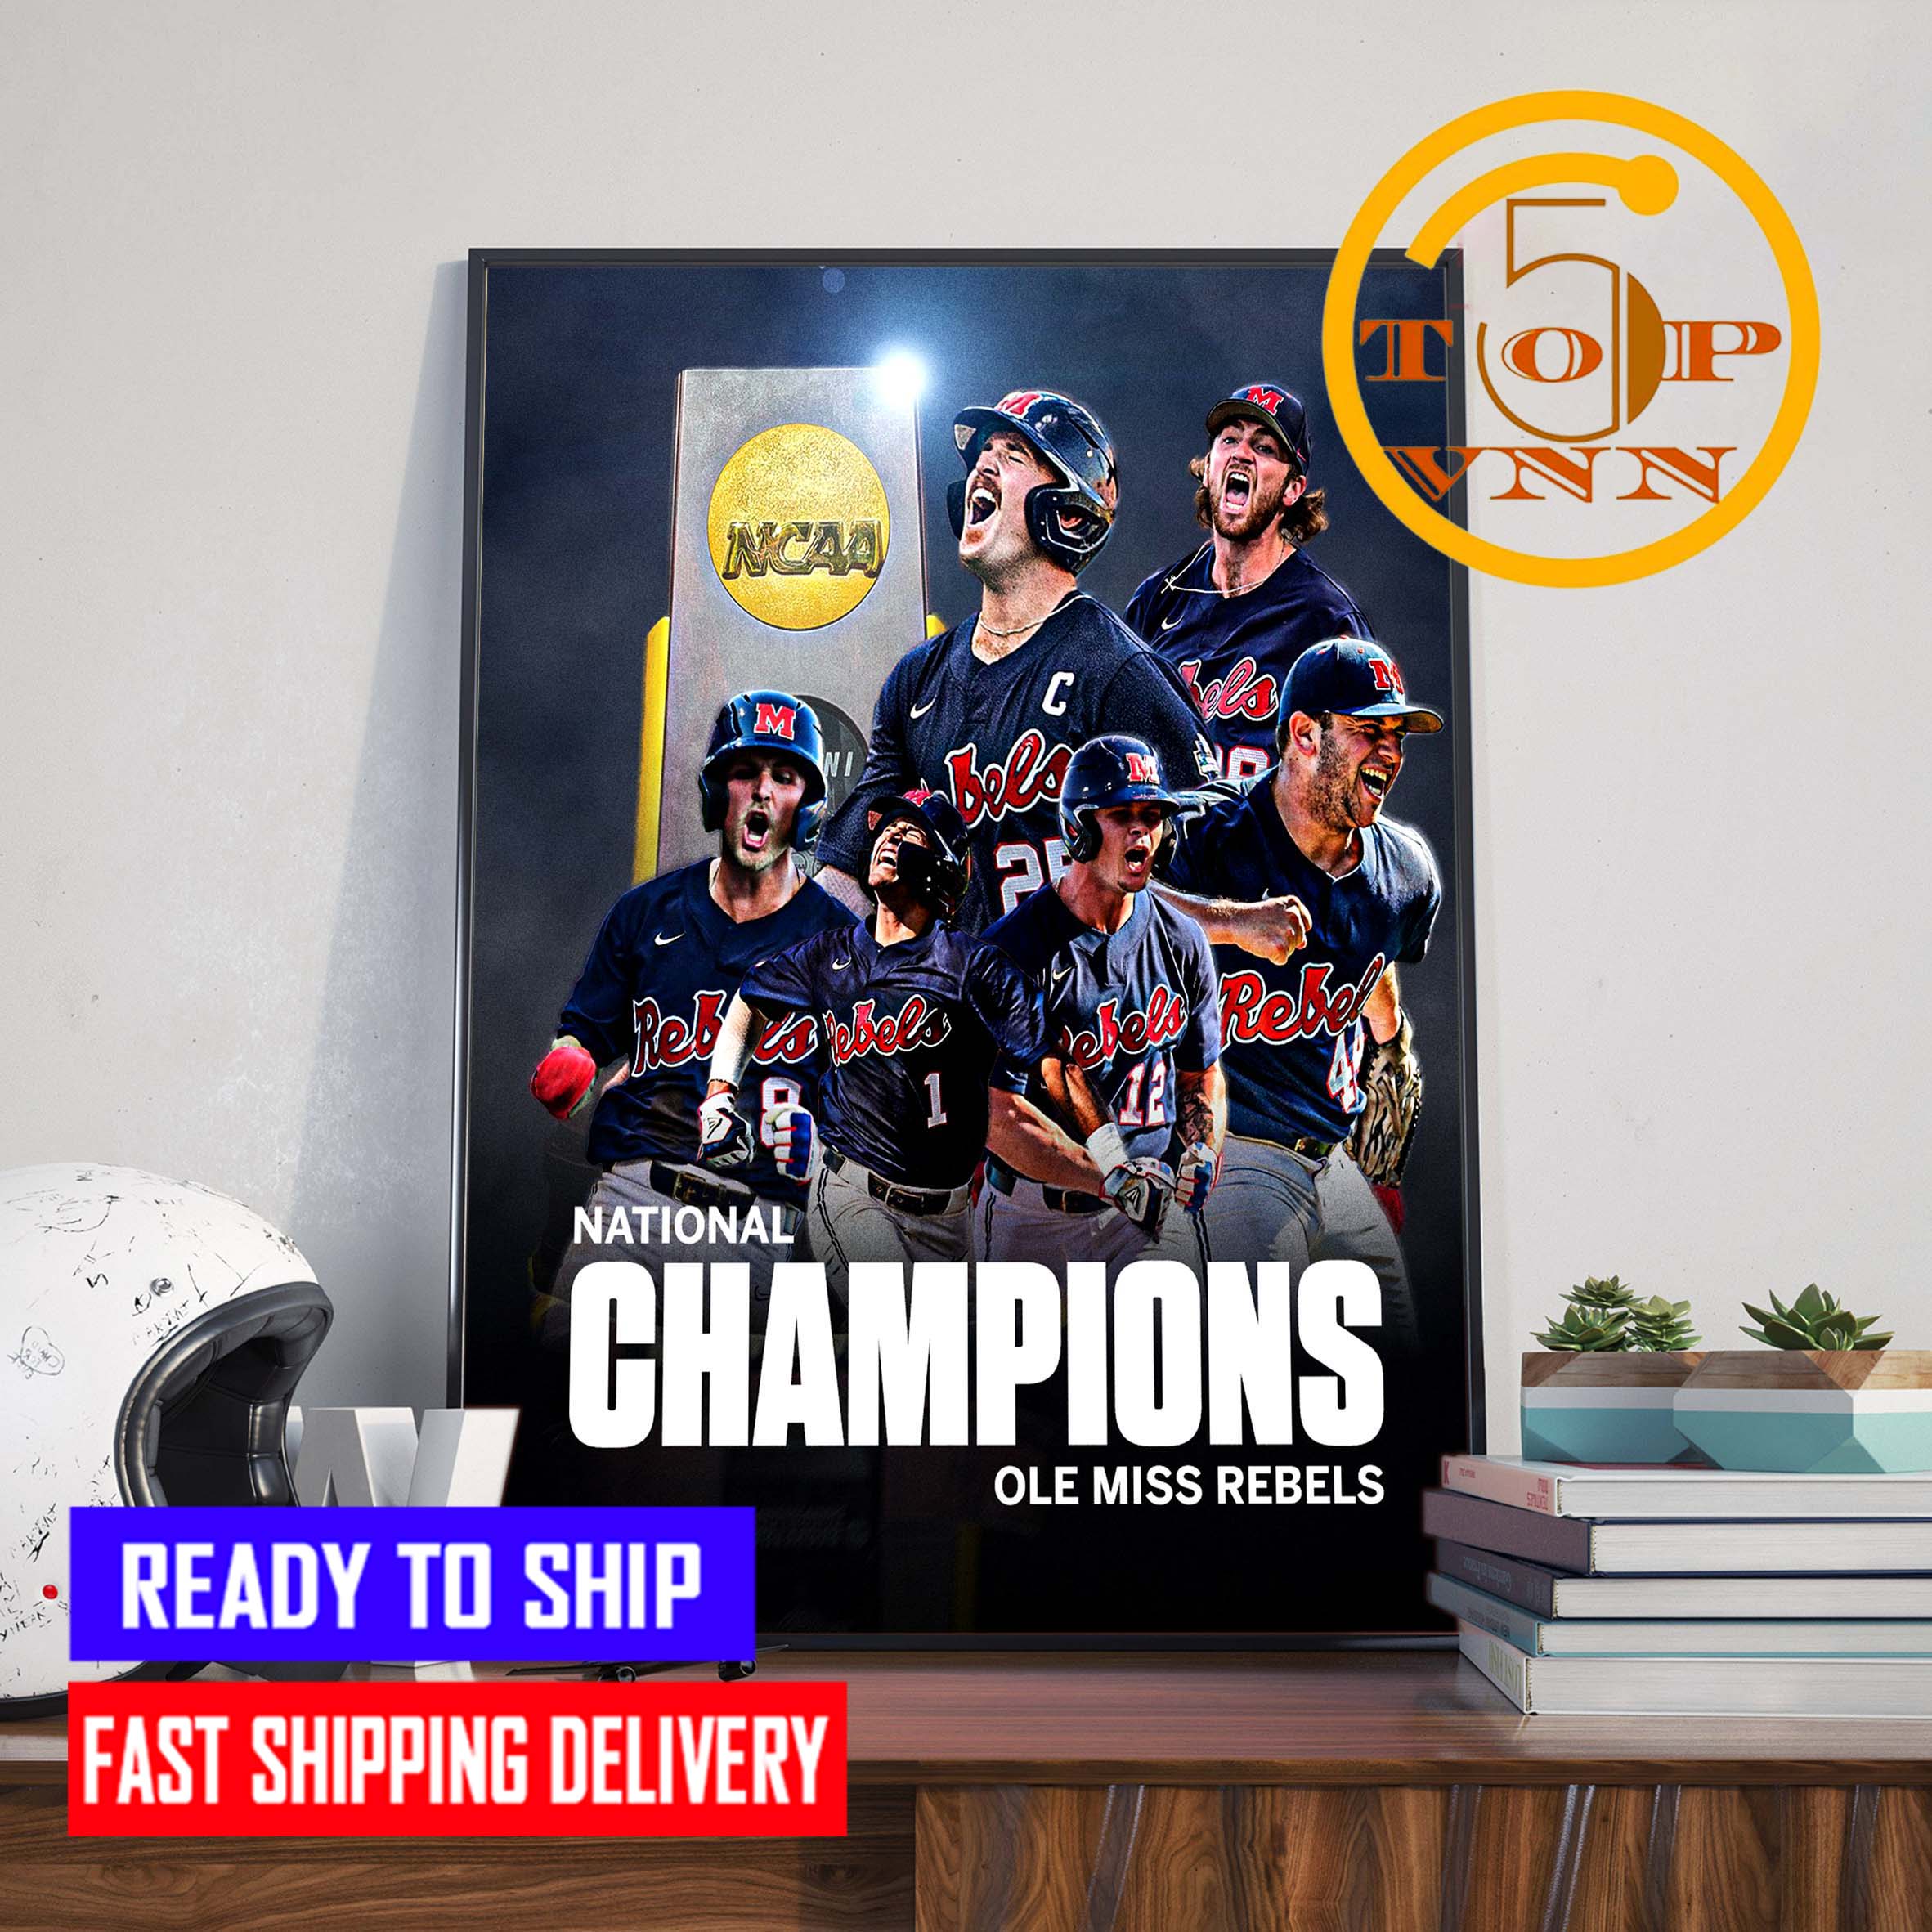 NEW NCAA Baseball National Champions Ole Miss Rebels Champs 2022 MCWS Champions Home Decor Poster Canvas